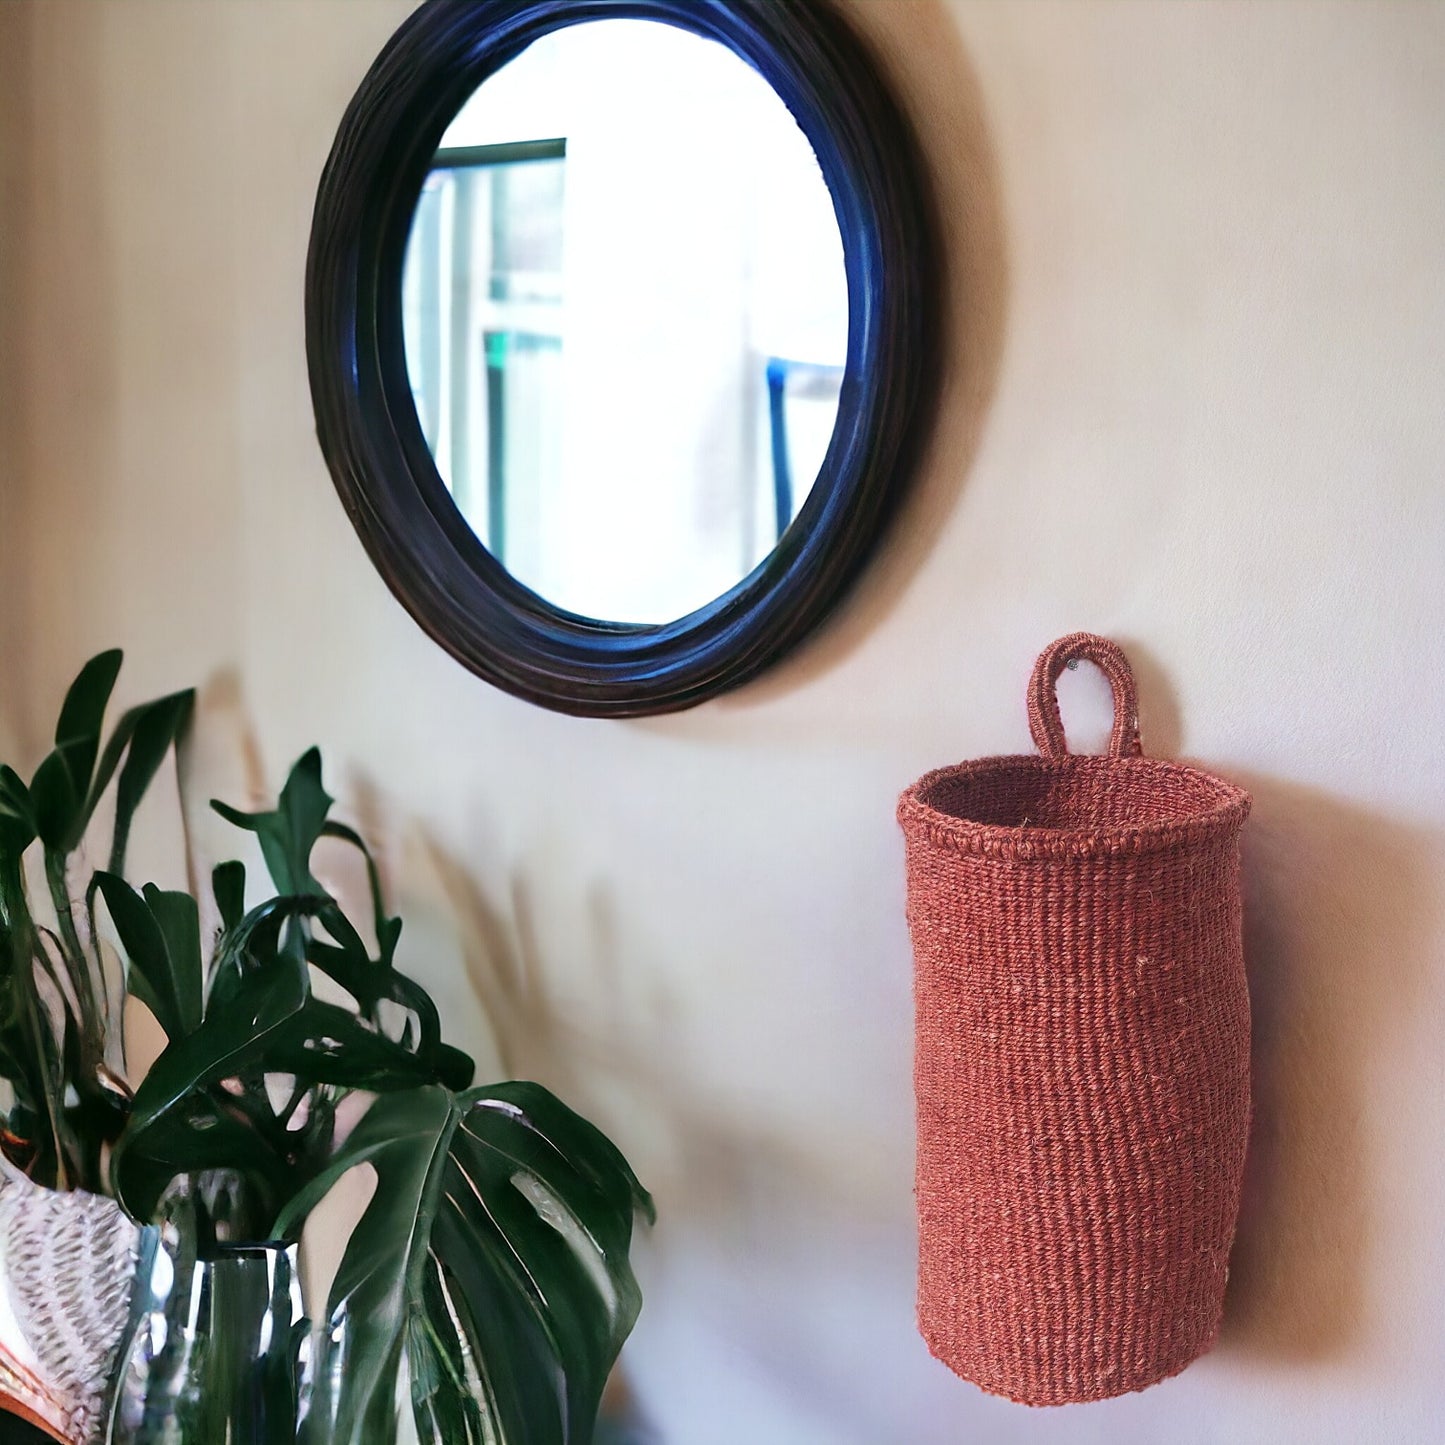 Woven storage basket on wall next to round mirror and greenery